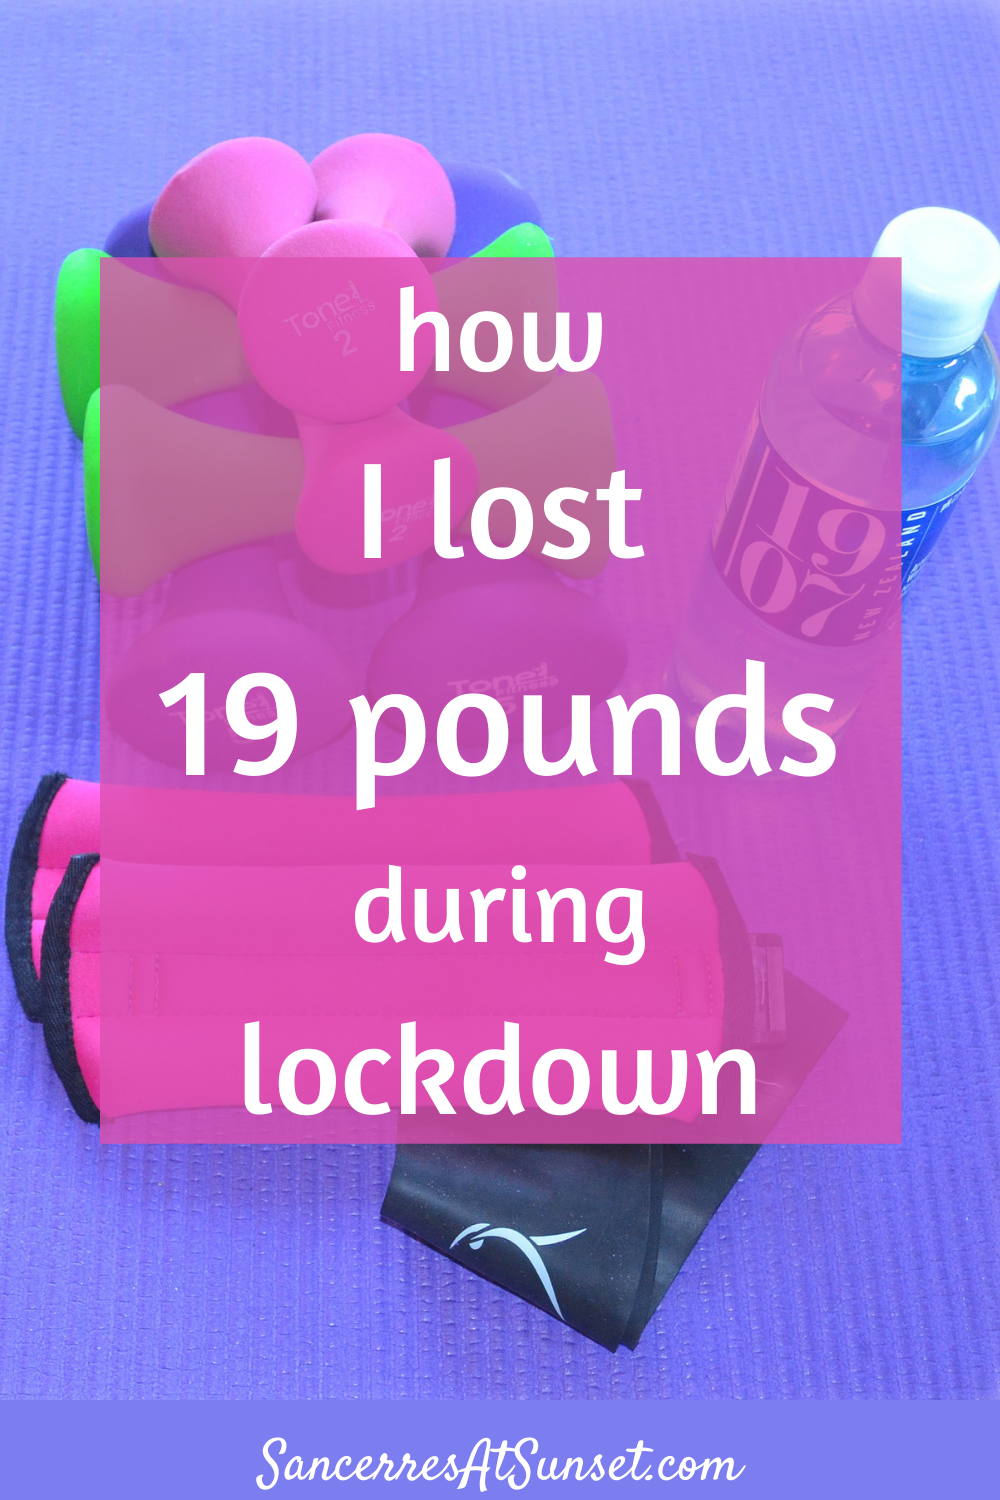 How I Lost 19 Pounds during Lockdown